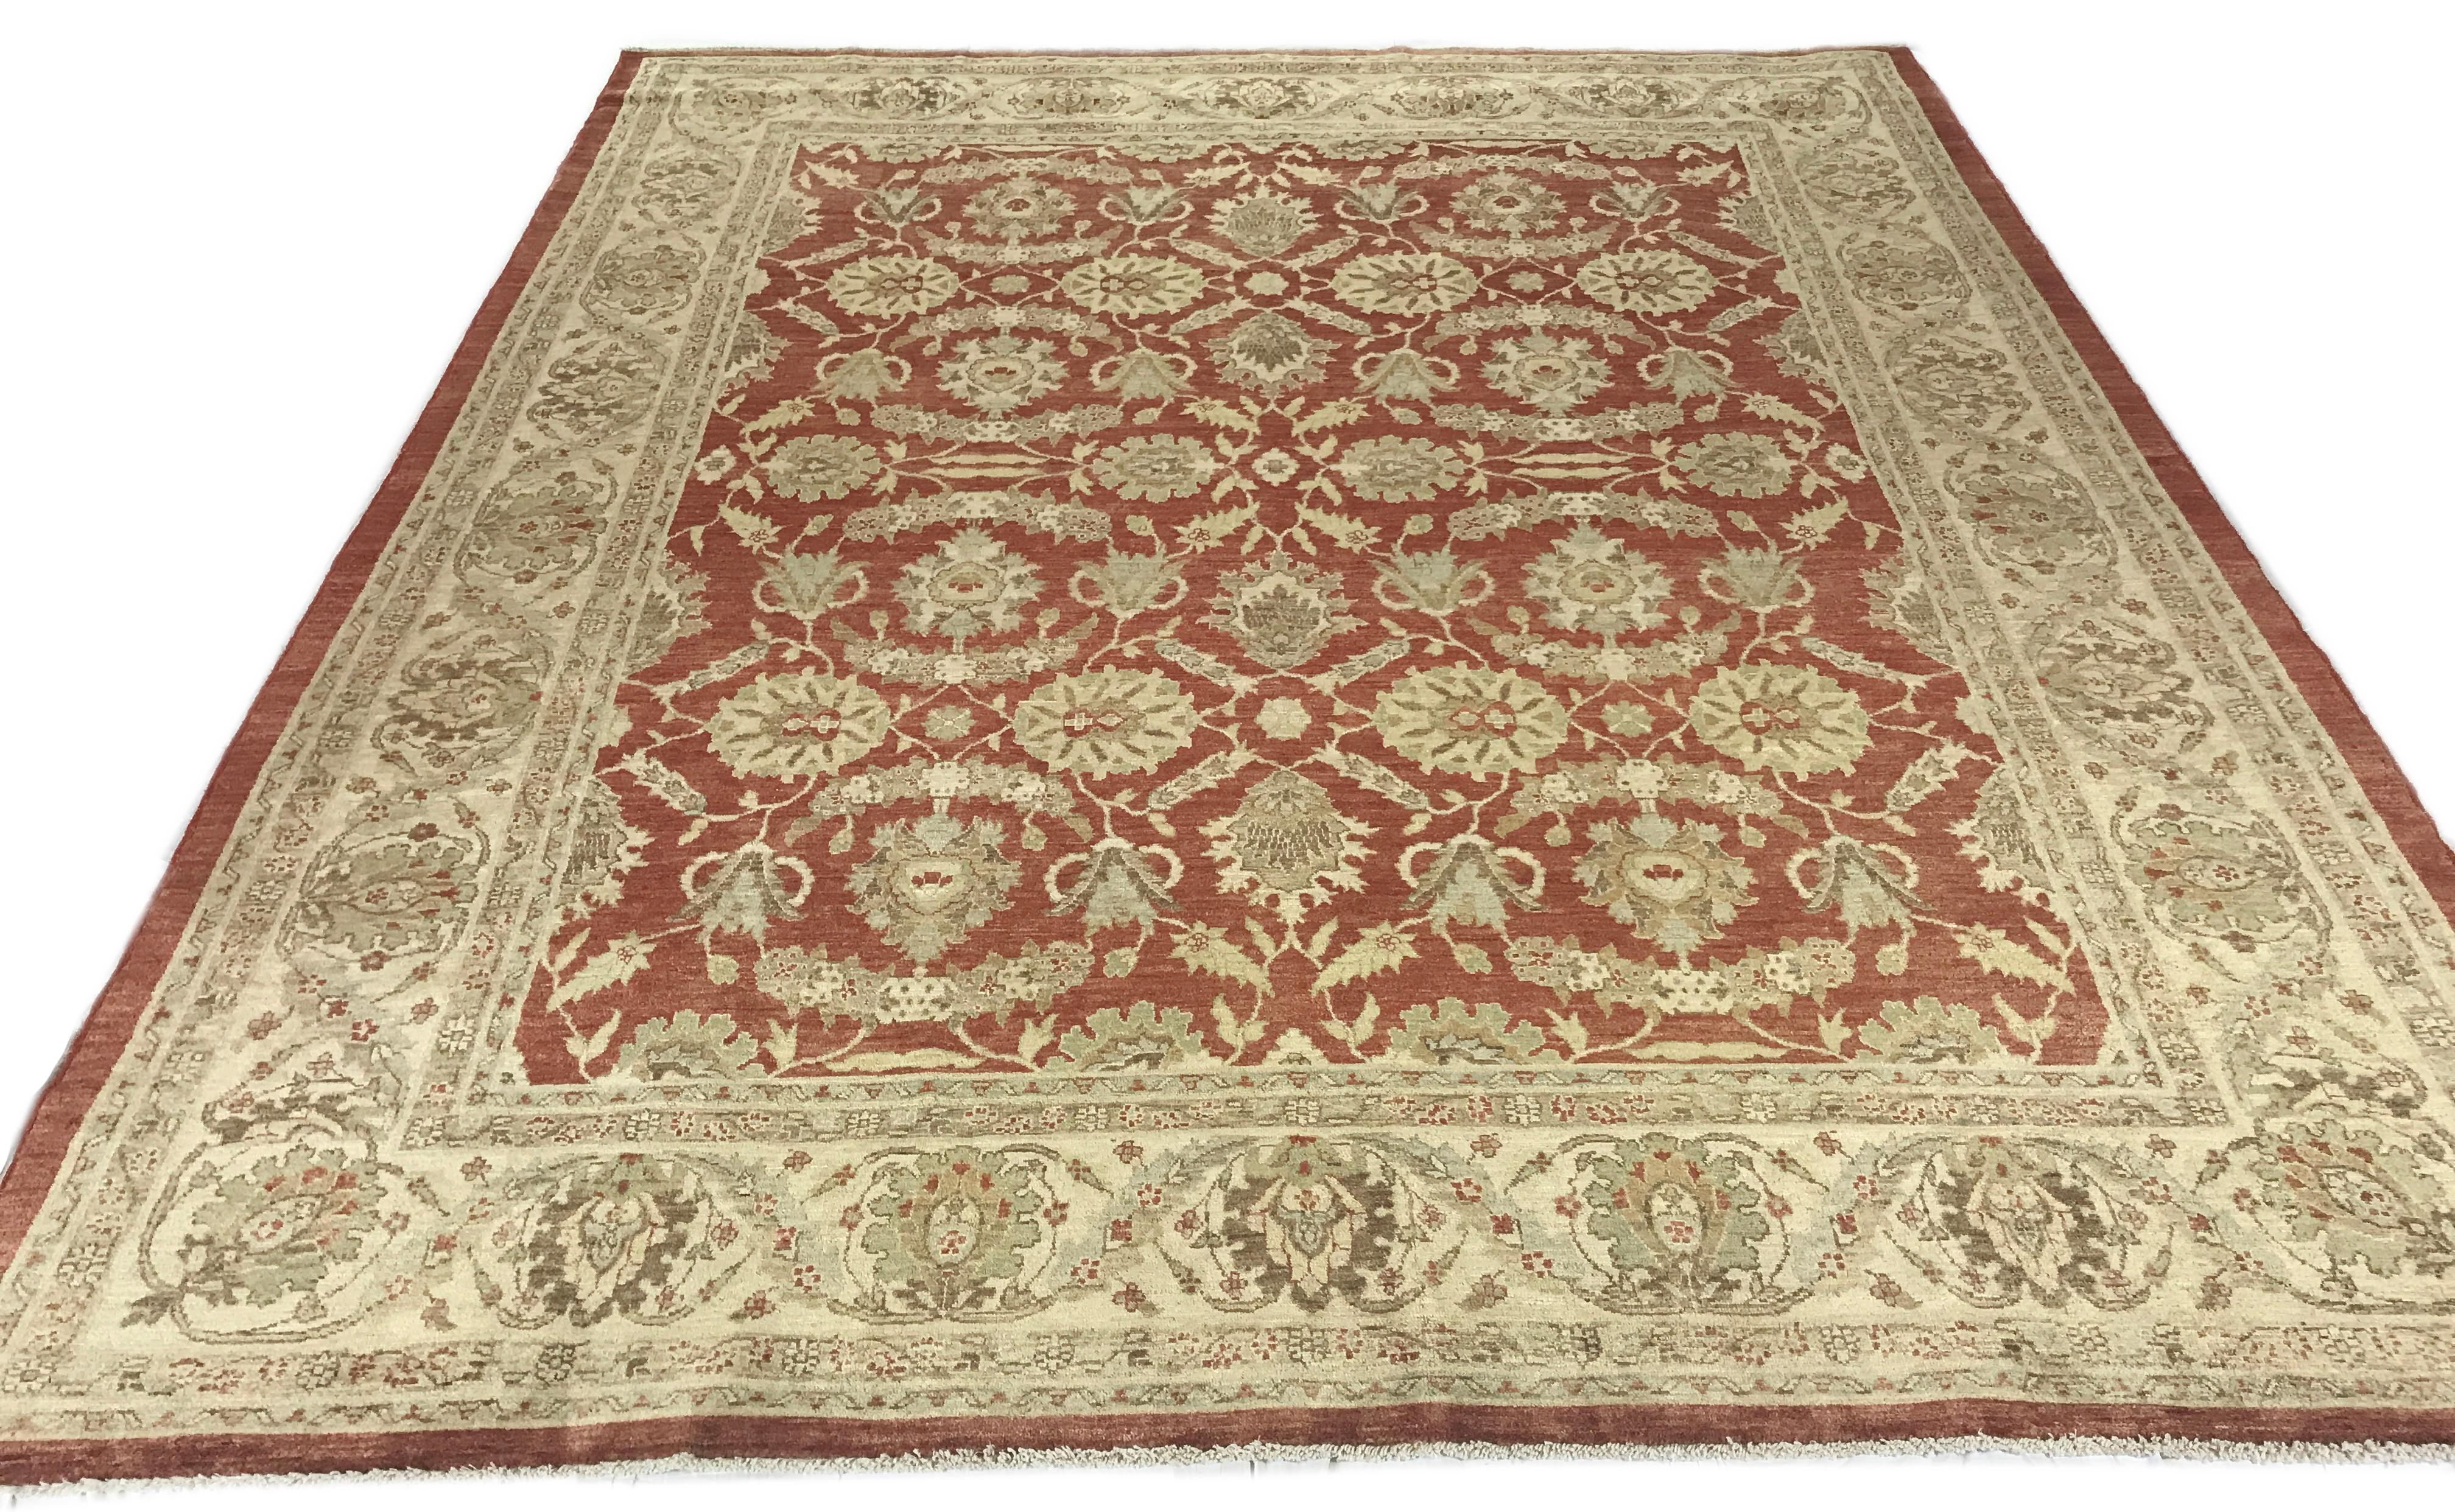 Beige and red traditional style wool area rug, 8' x 9'7